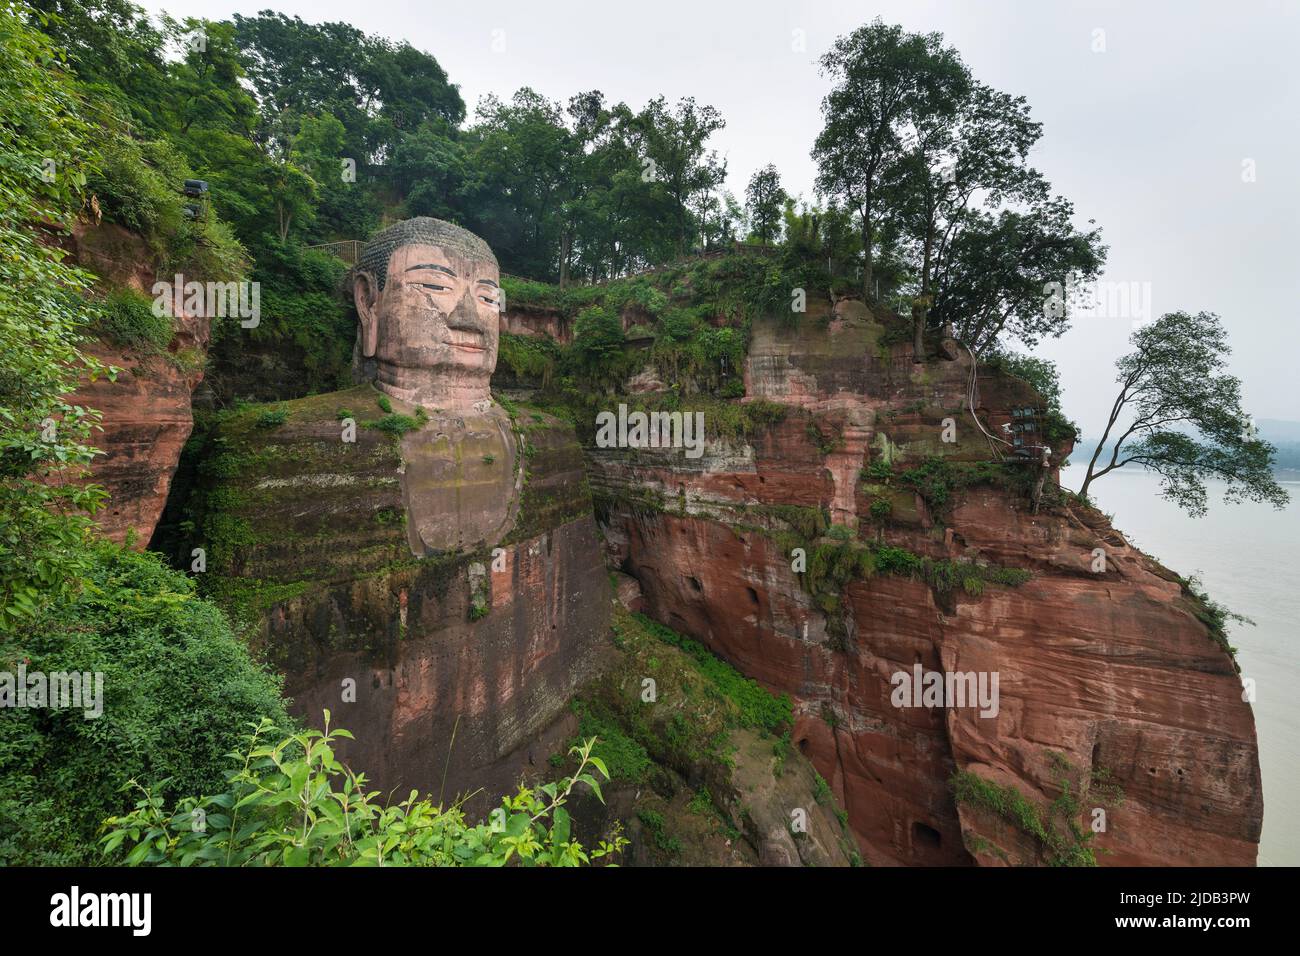 Leshan Giant Buddha, the largest and tallest stone Buddha statue in the world, carved into the rock face on the red, sandstone cliffs overlooking t... Stock Photo